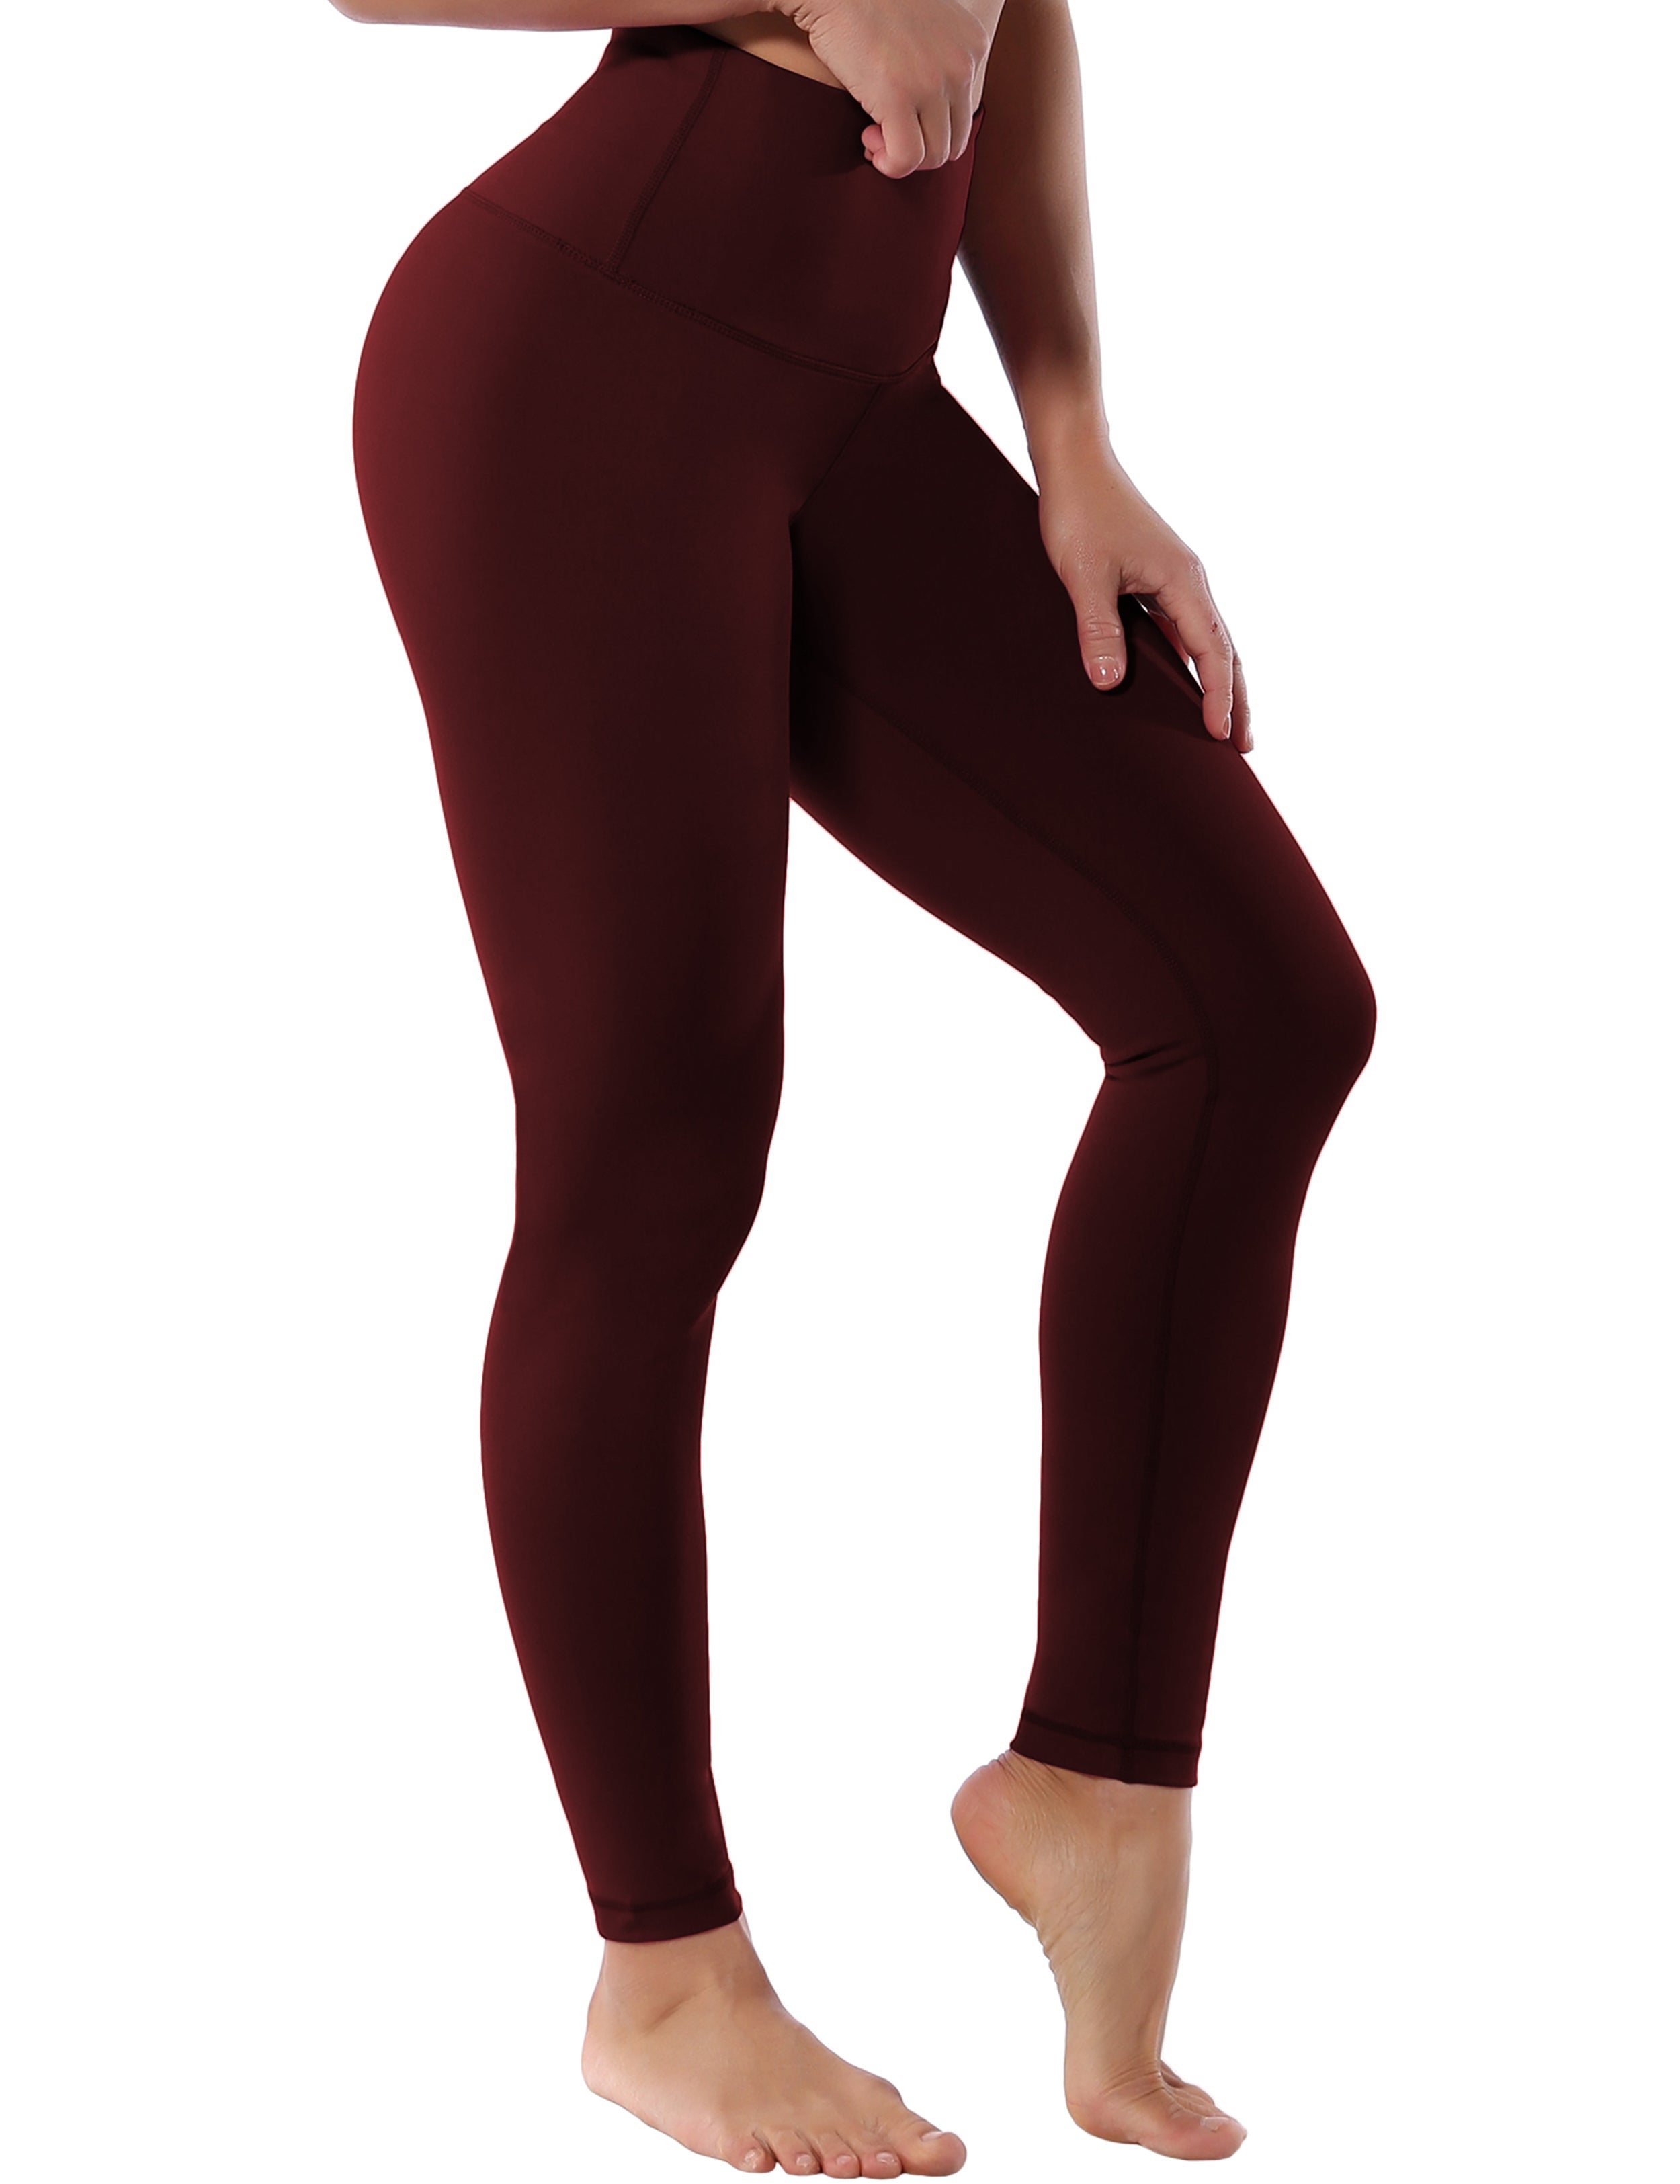 High Waist Golf Pants cherryred 75%Nylon/25%Spandex Fabric doesn't attract lint easily 4-way stretch No see-through Moisture-wicking Tummy control Inner pocket Four lengths